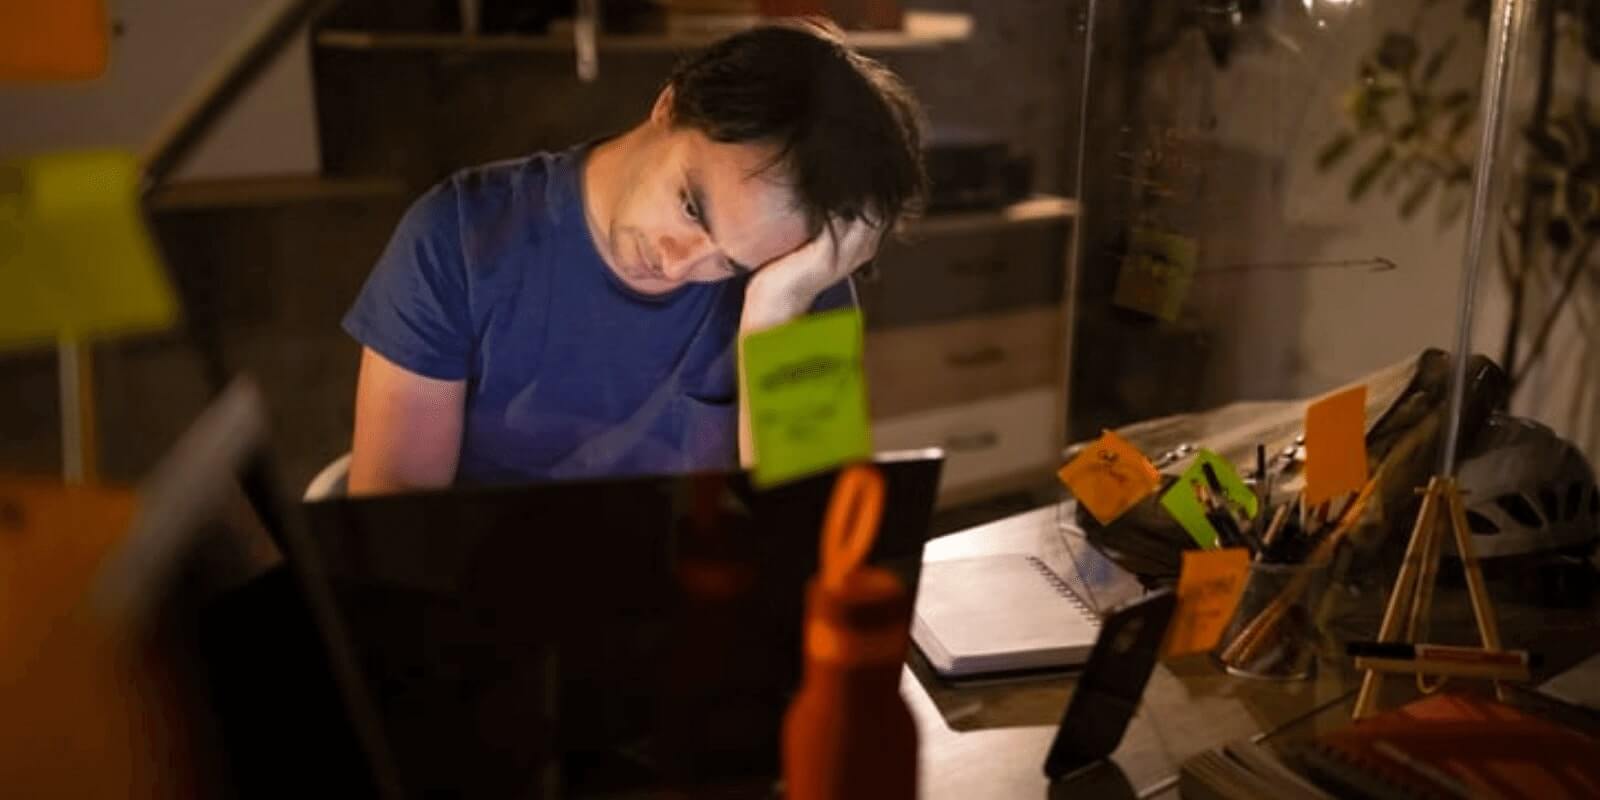 A young man looking depressed while looking at a monitor